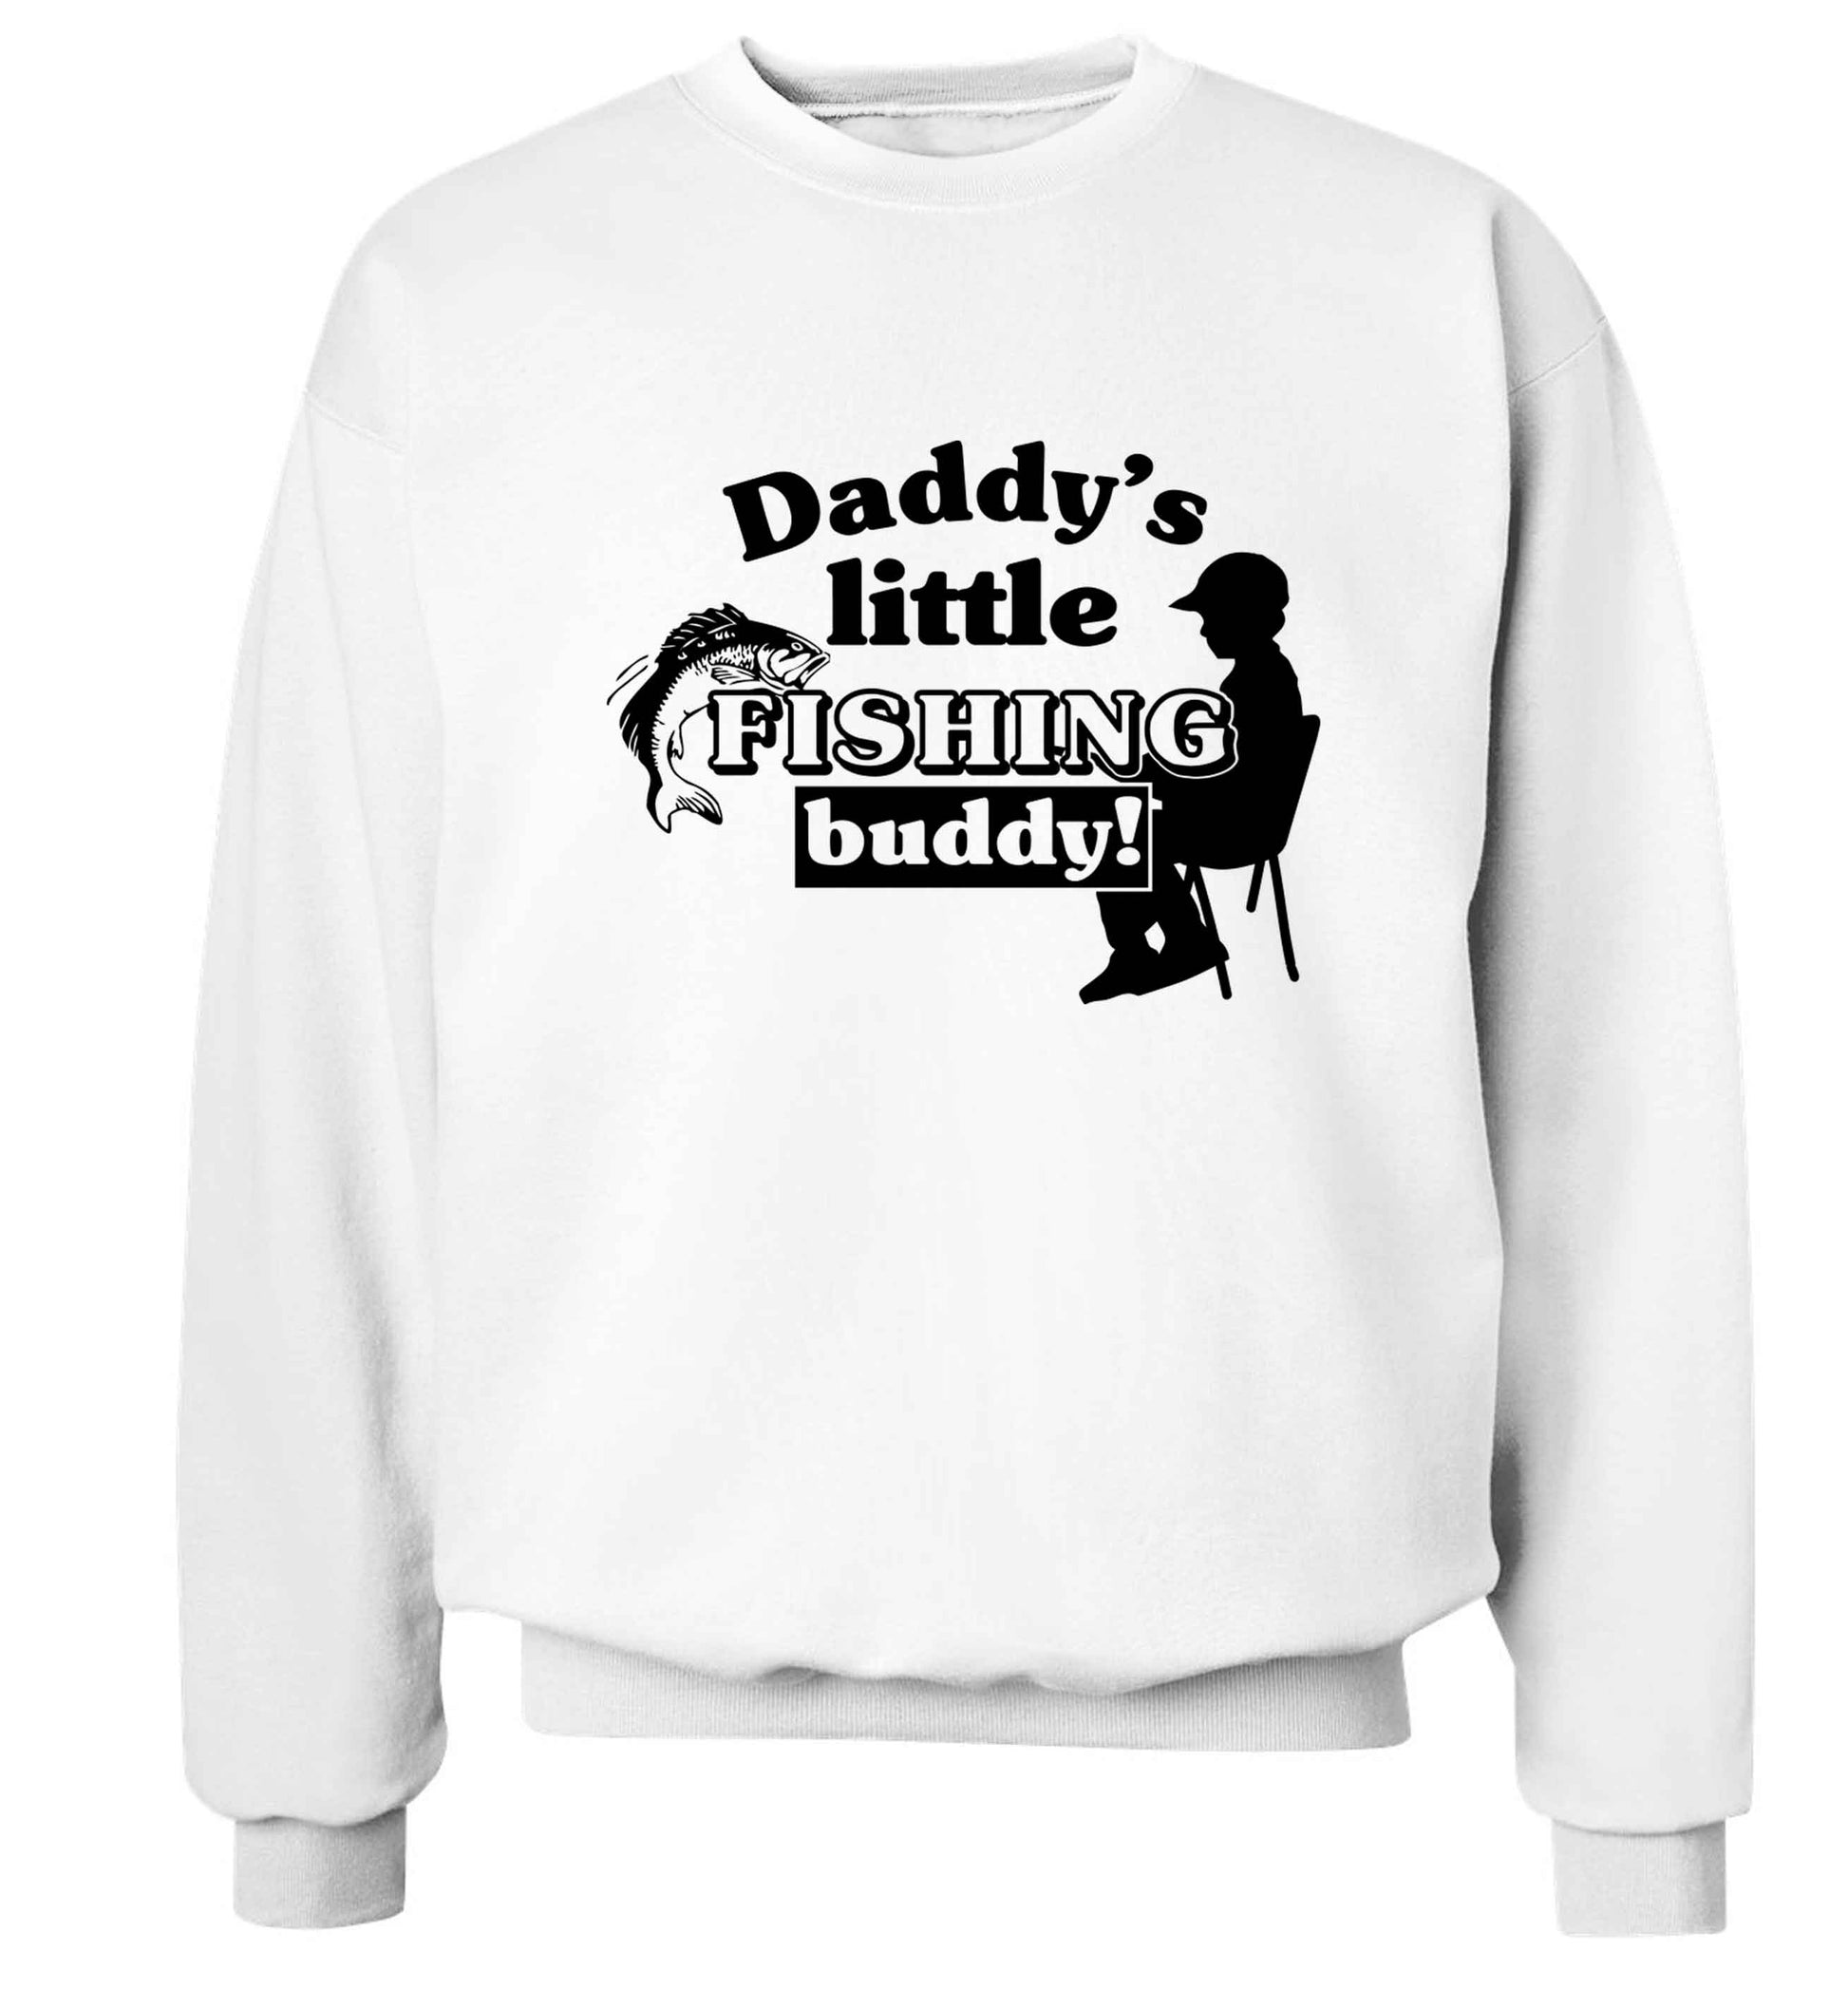 Daddy's little fishing buddy Adult's unisex white Sweater 2XL